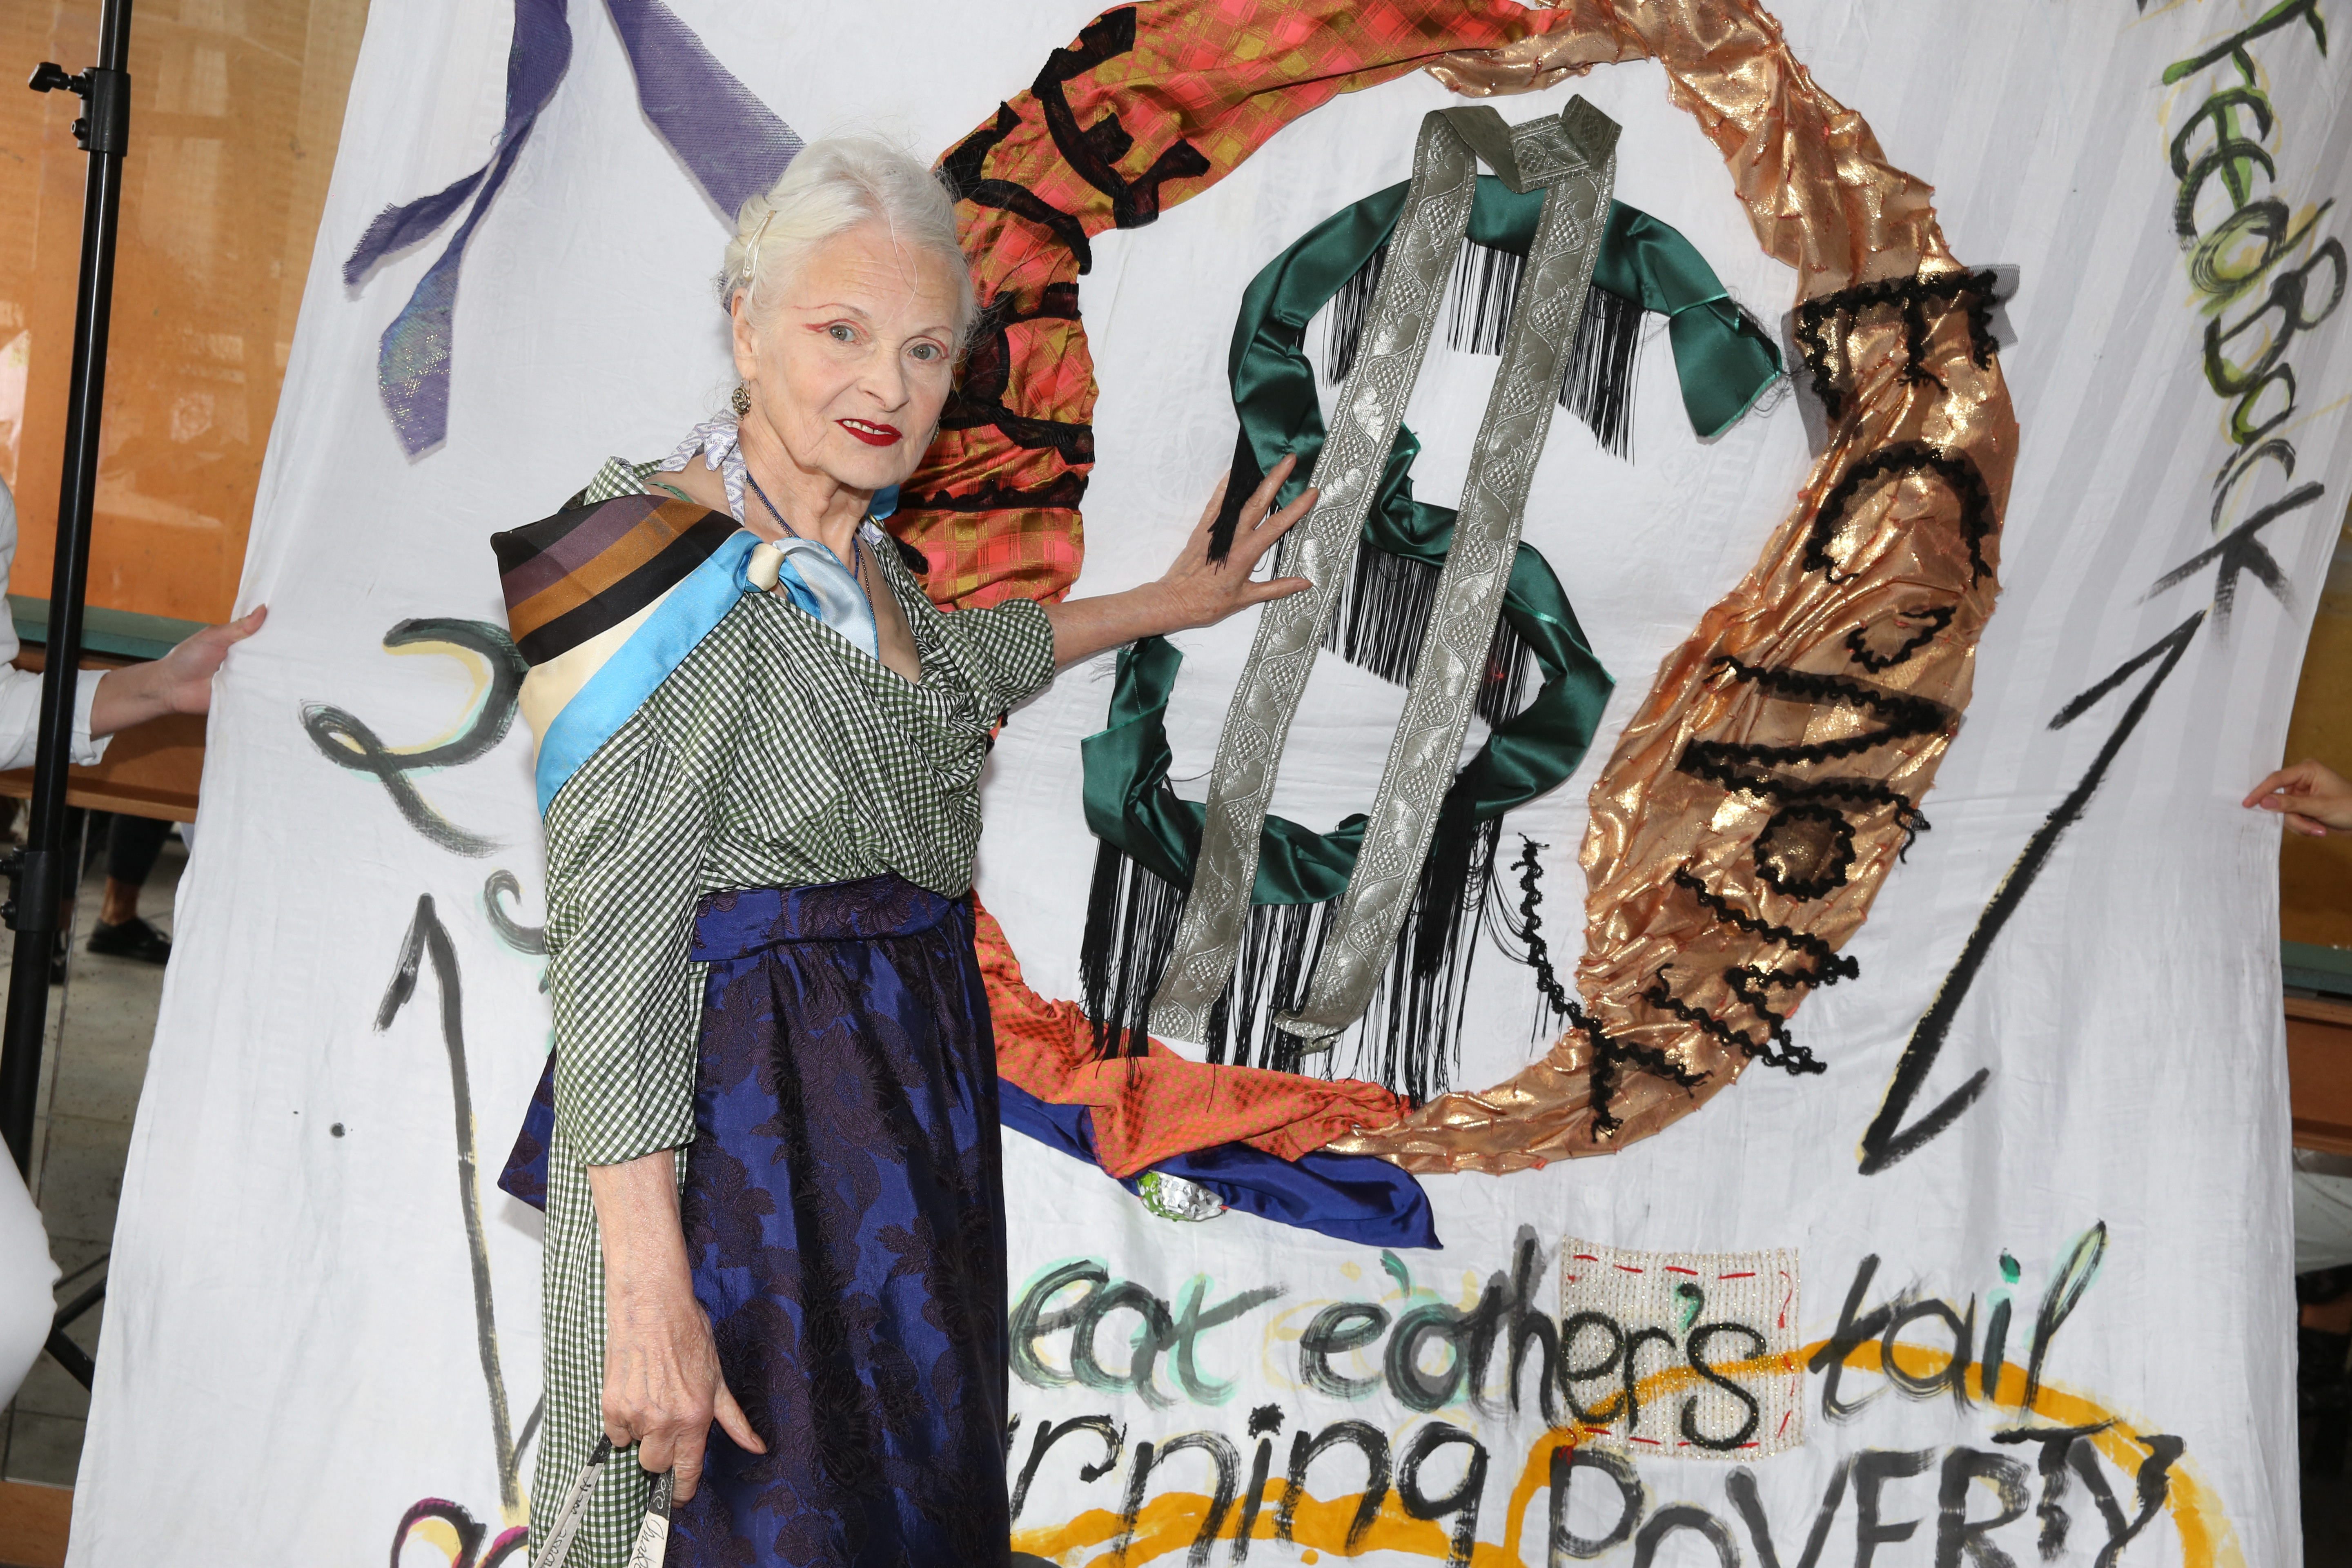 Vivienne Westwood, fashion designer and style icon, dies at 81